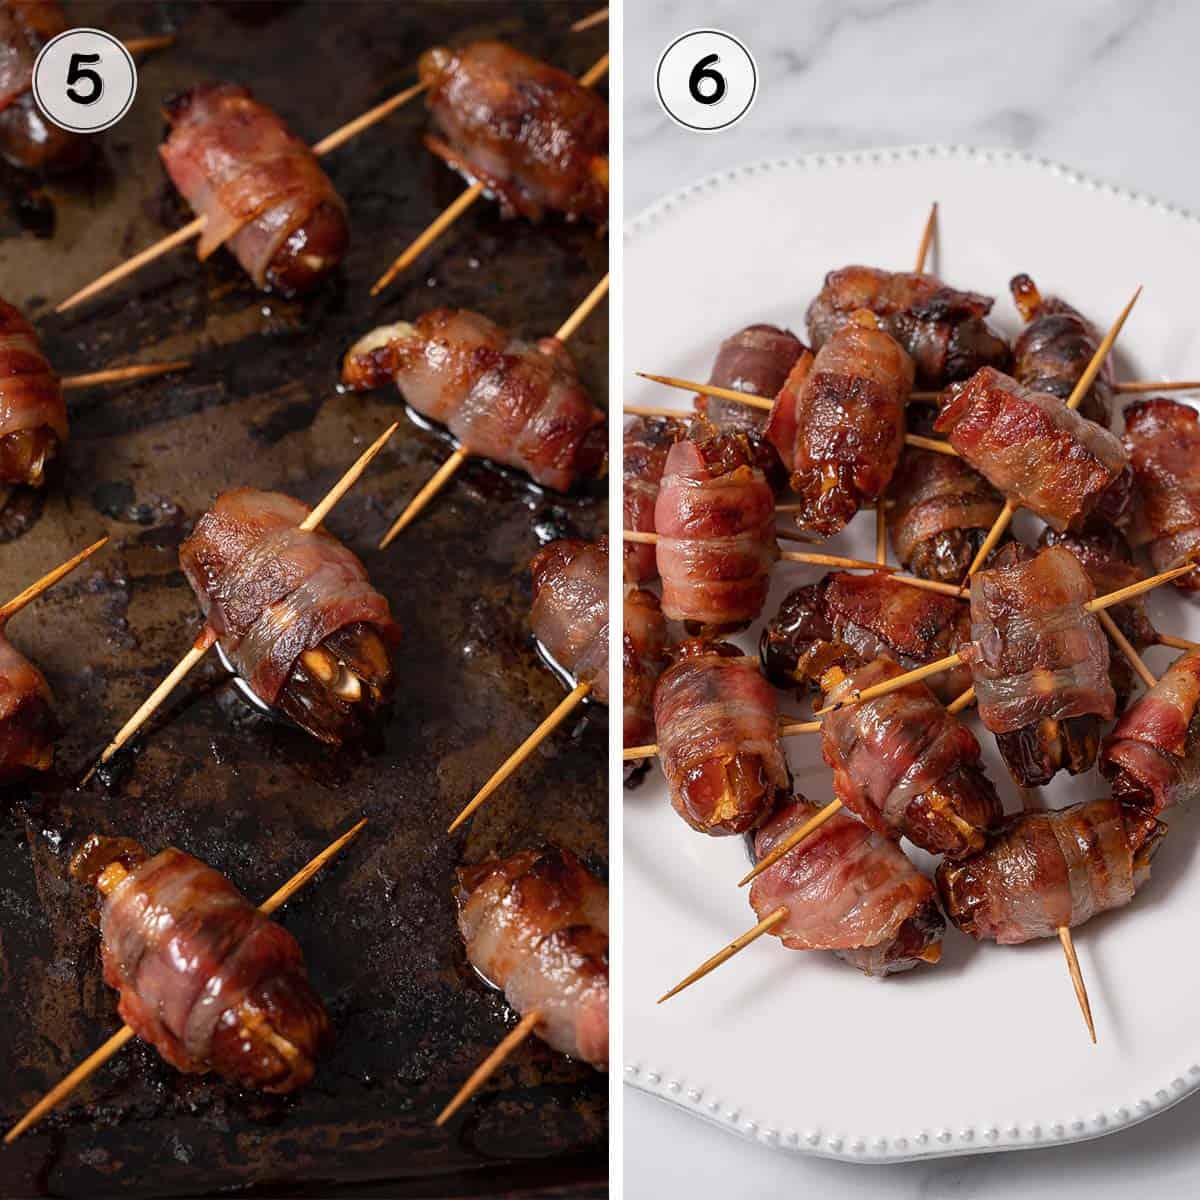 baked bacon wrapped dates on a tray and on a plate.